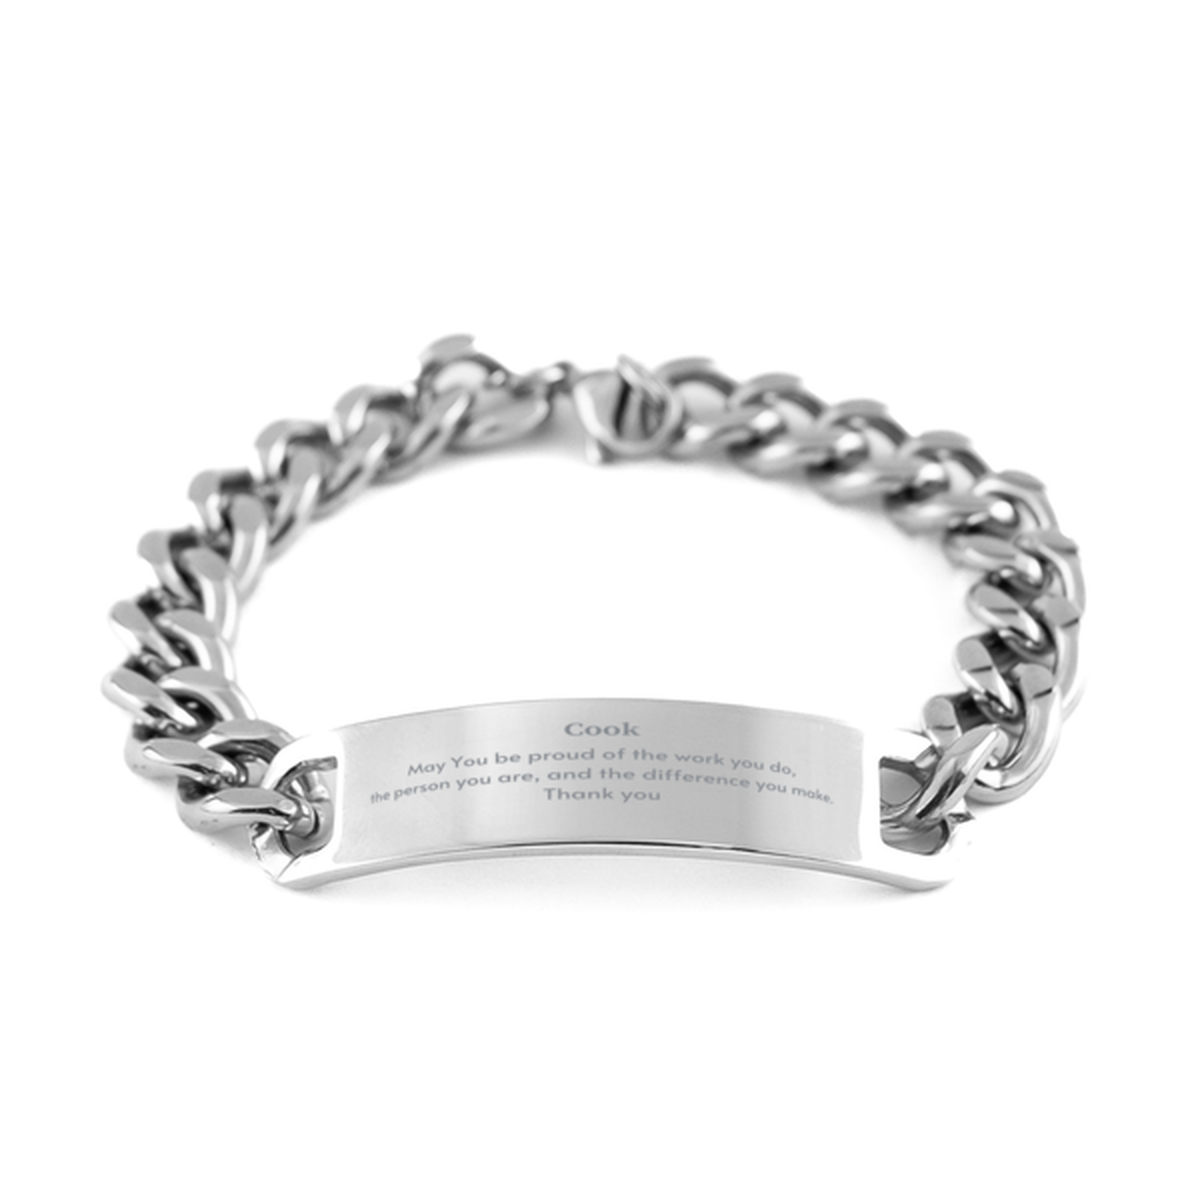 Heartwarming Cuban Chain Stainless Steel Bracelet Retirement Coworkers Gifts for Cook, Cook May You be proud of the work you do, the person you are Gifts for Boss Men Women Friends